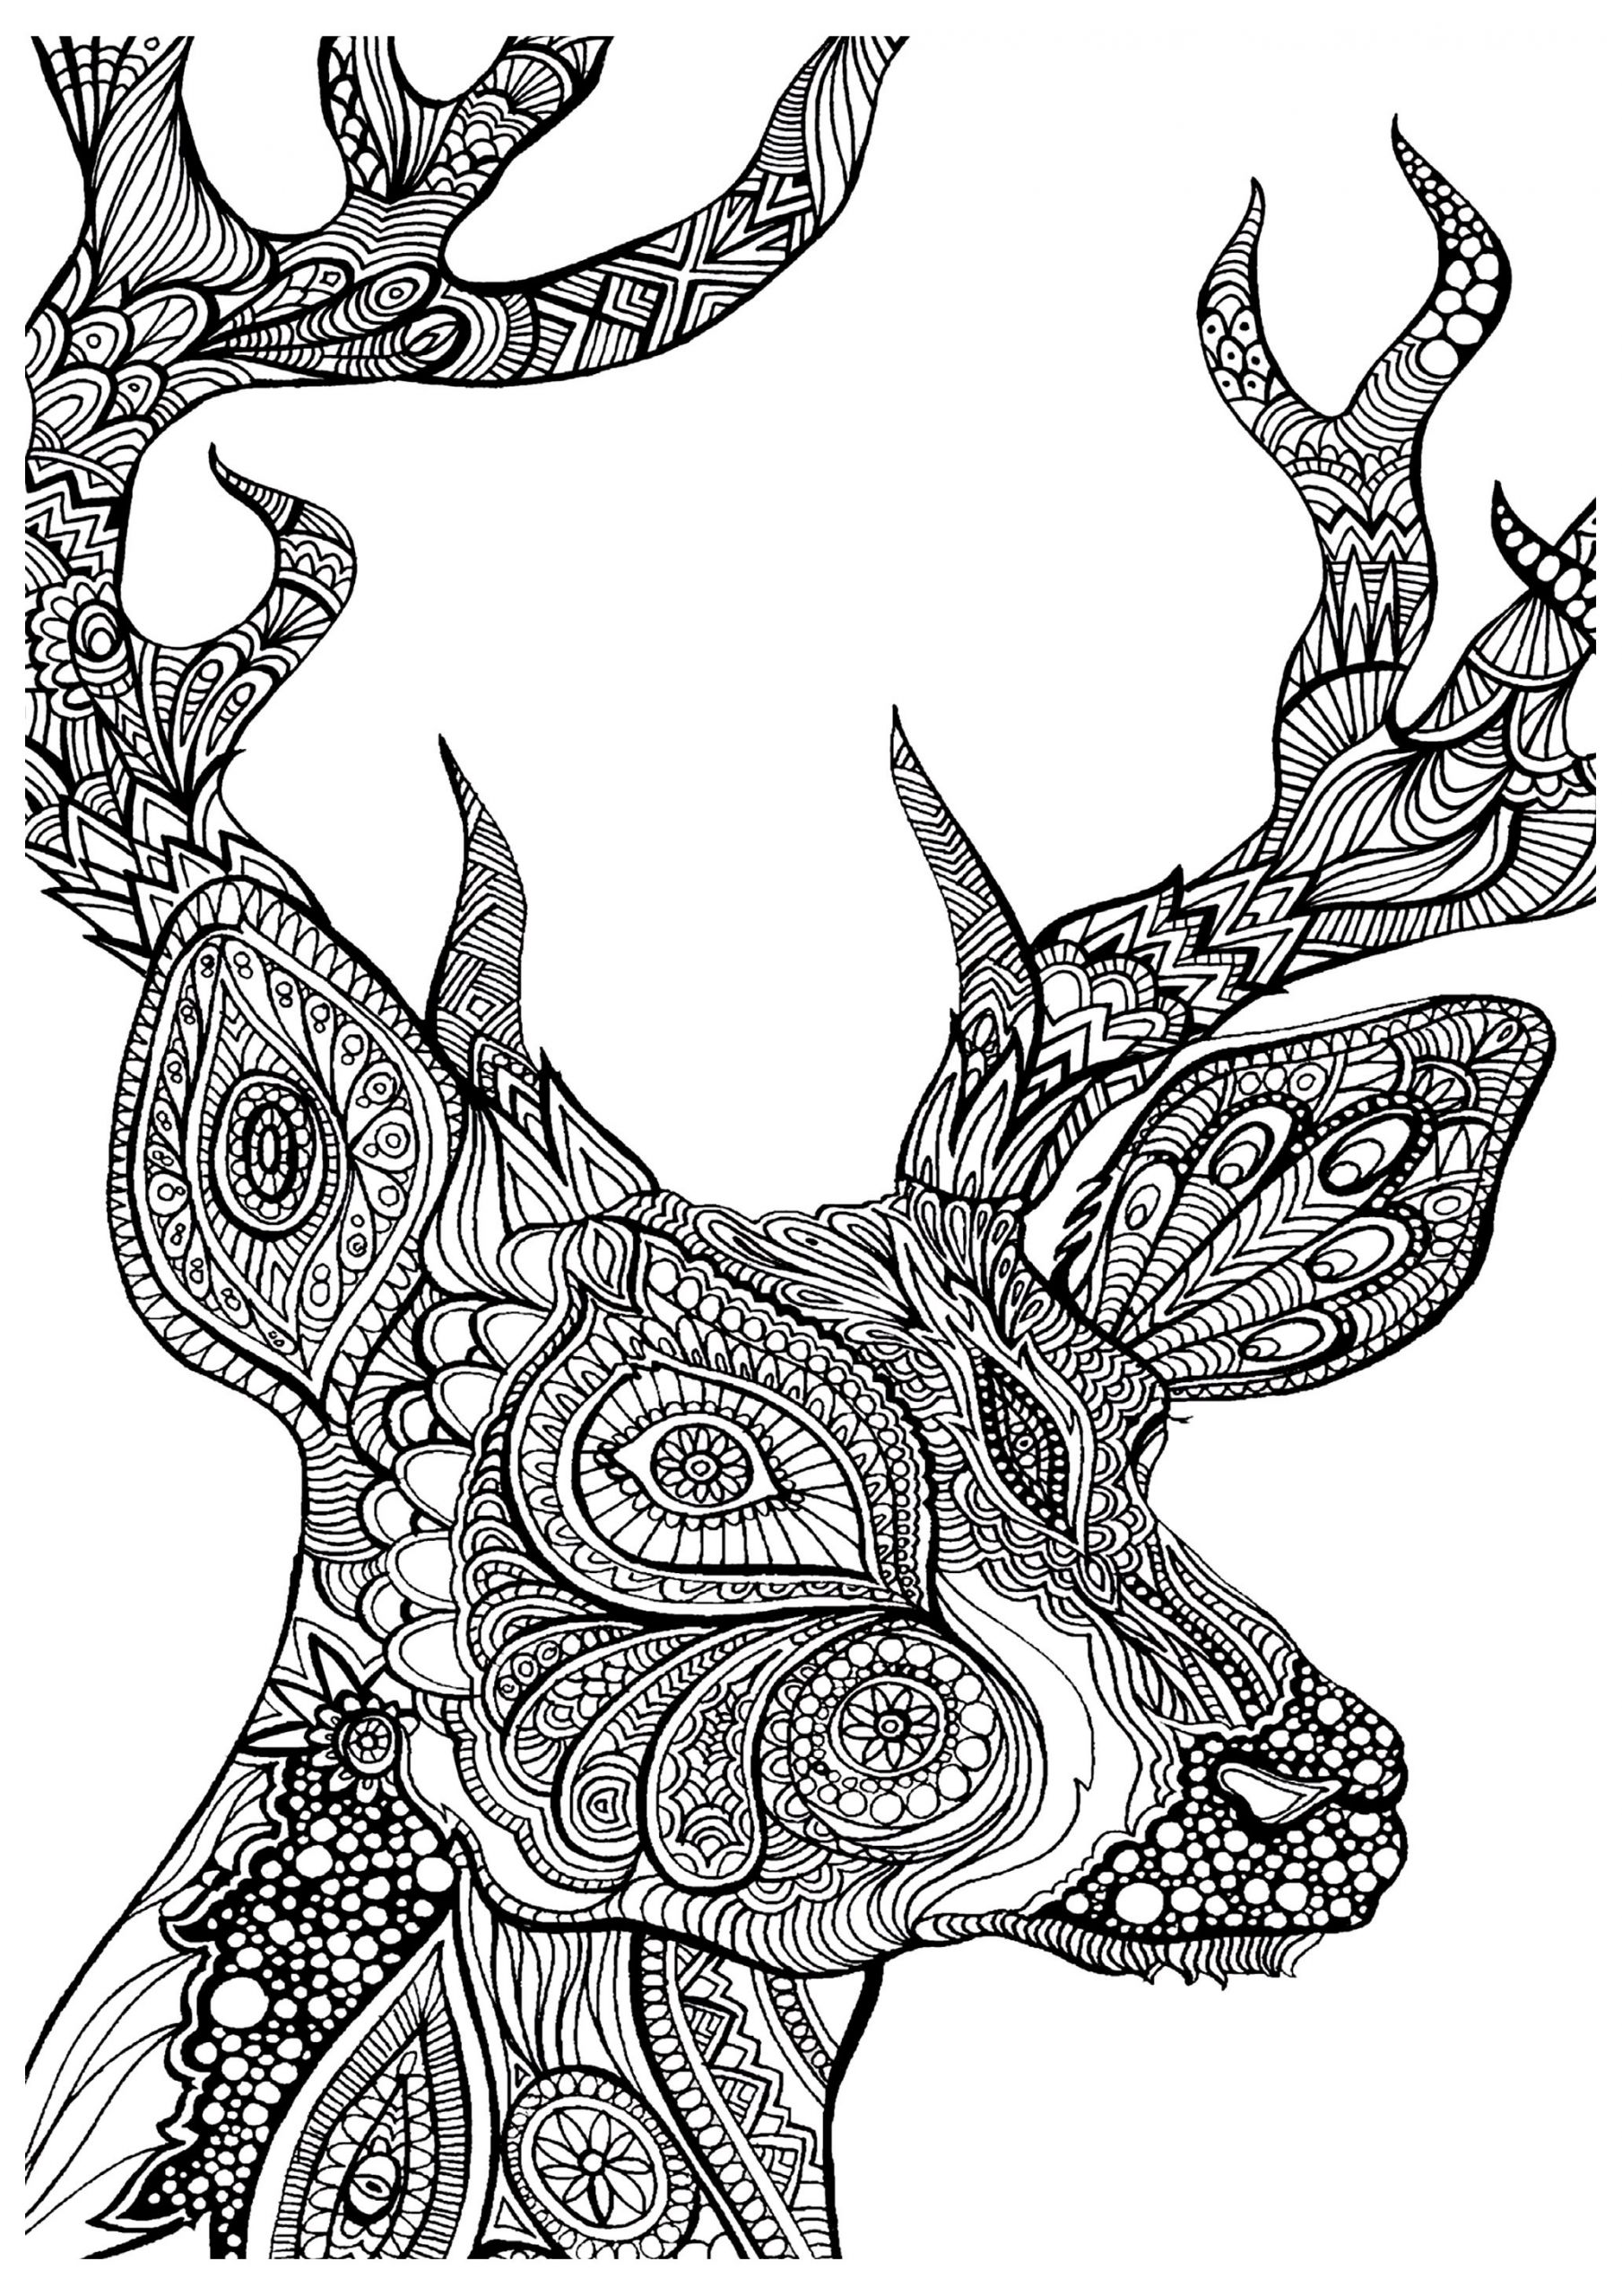 Printable Adult Coloring Pages
 19 of the Best Adult Colouring Pages Free Printables for